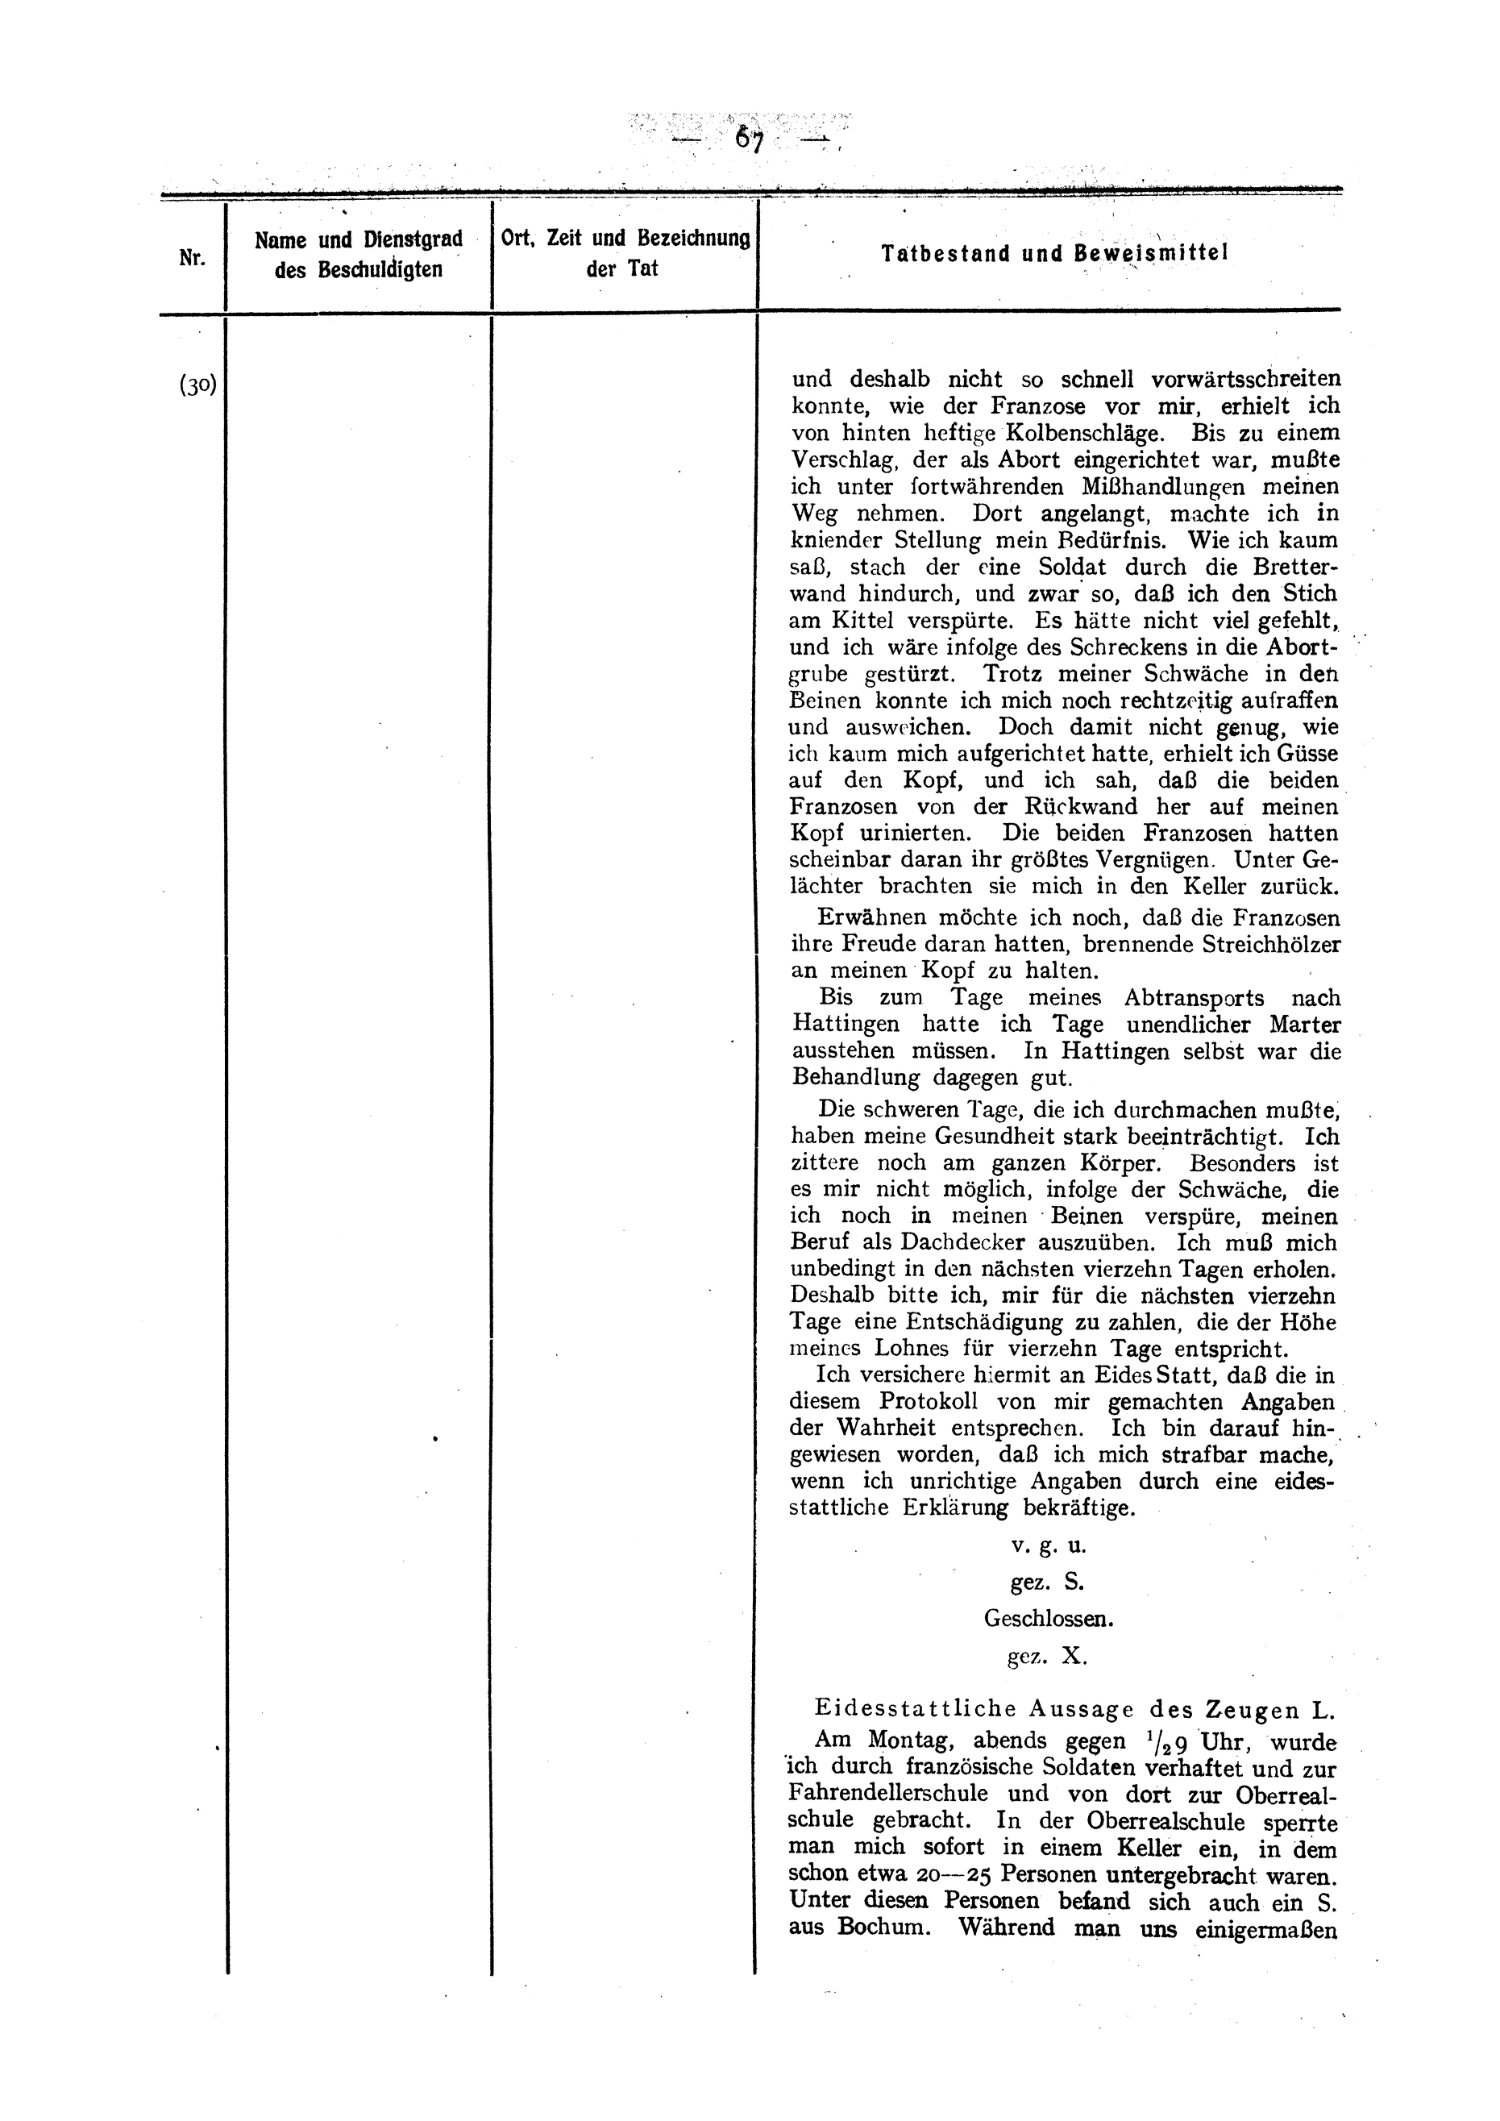 Scan of page 67